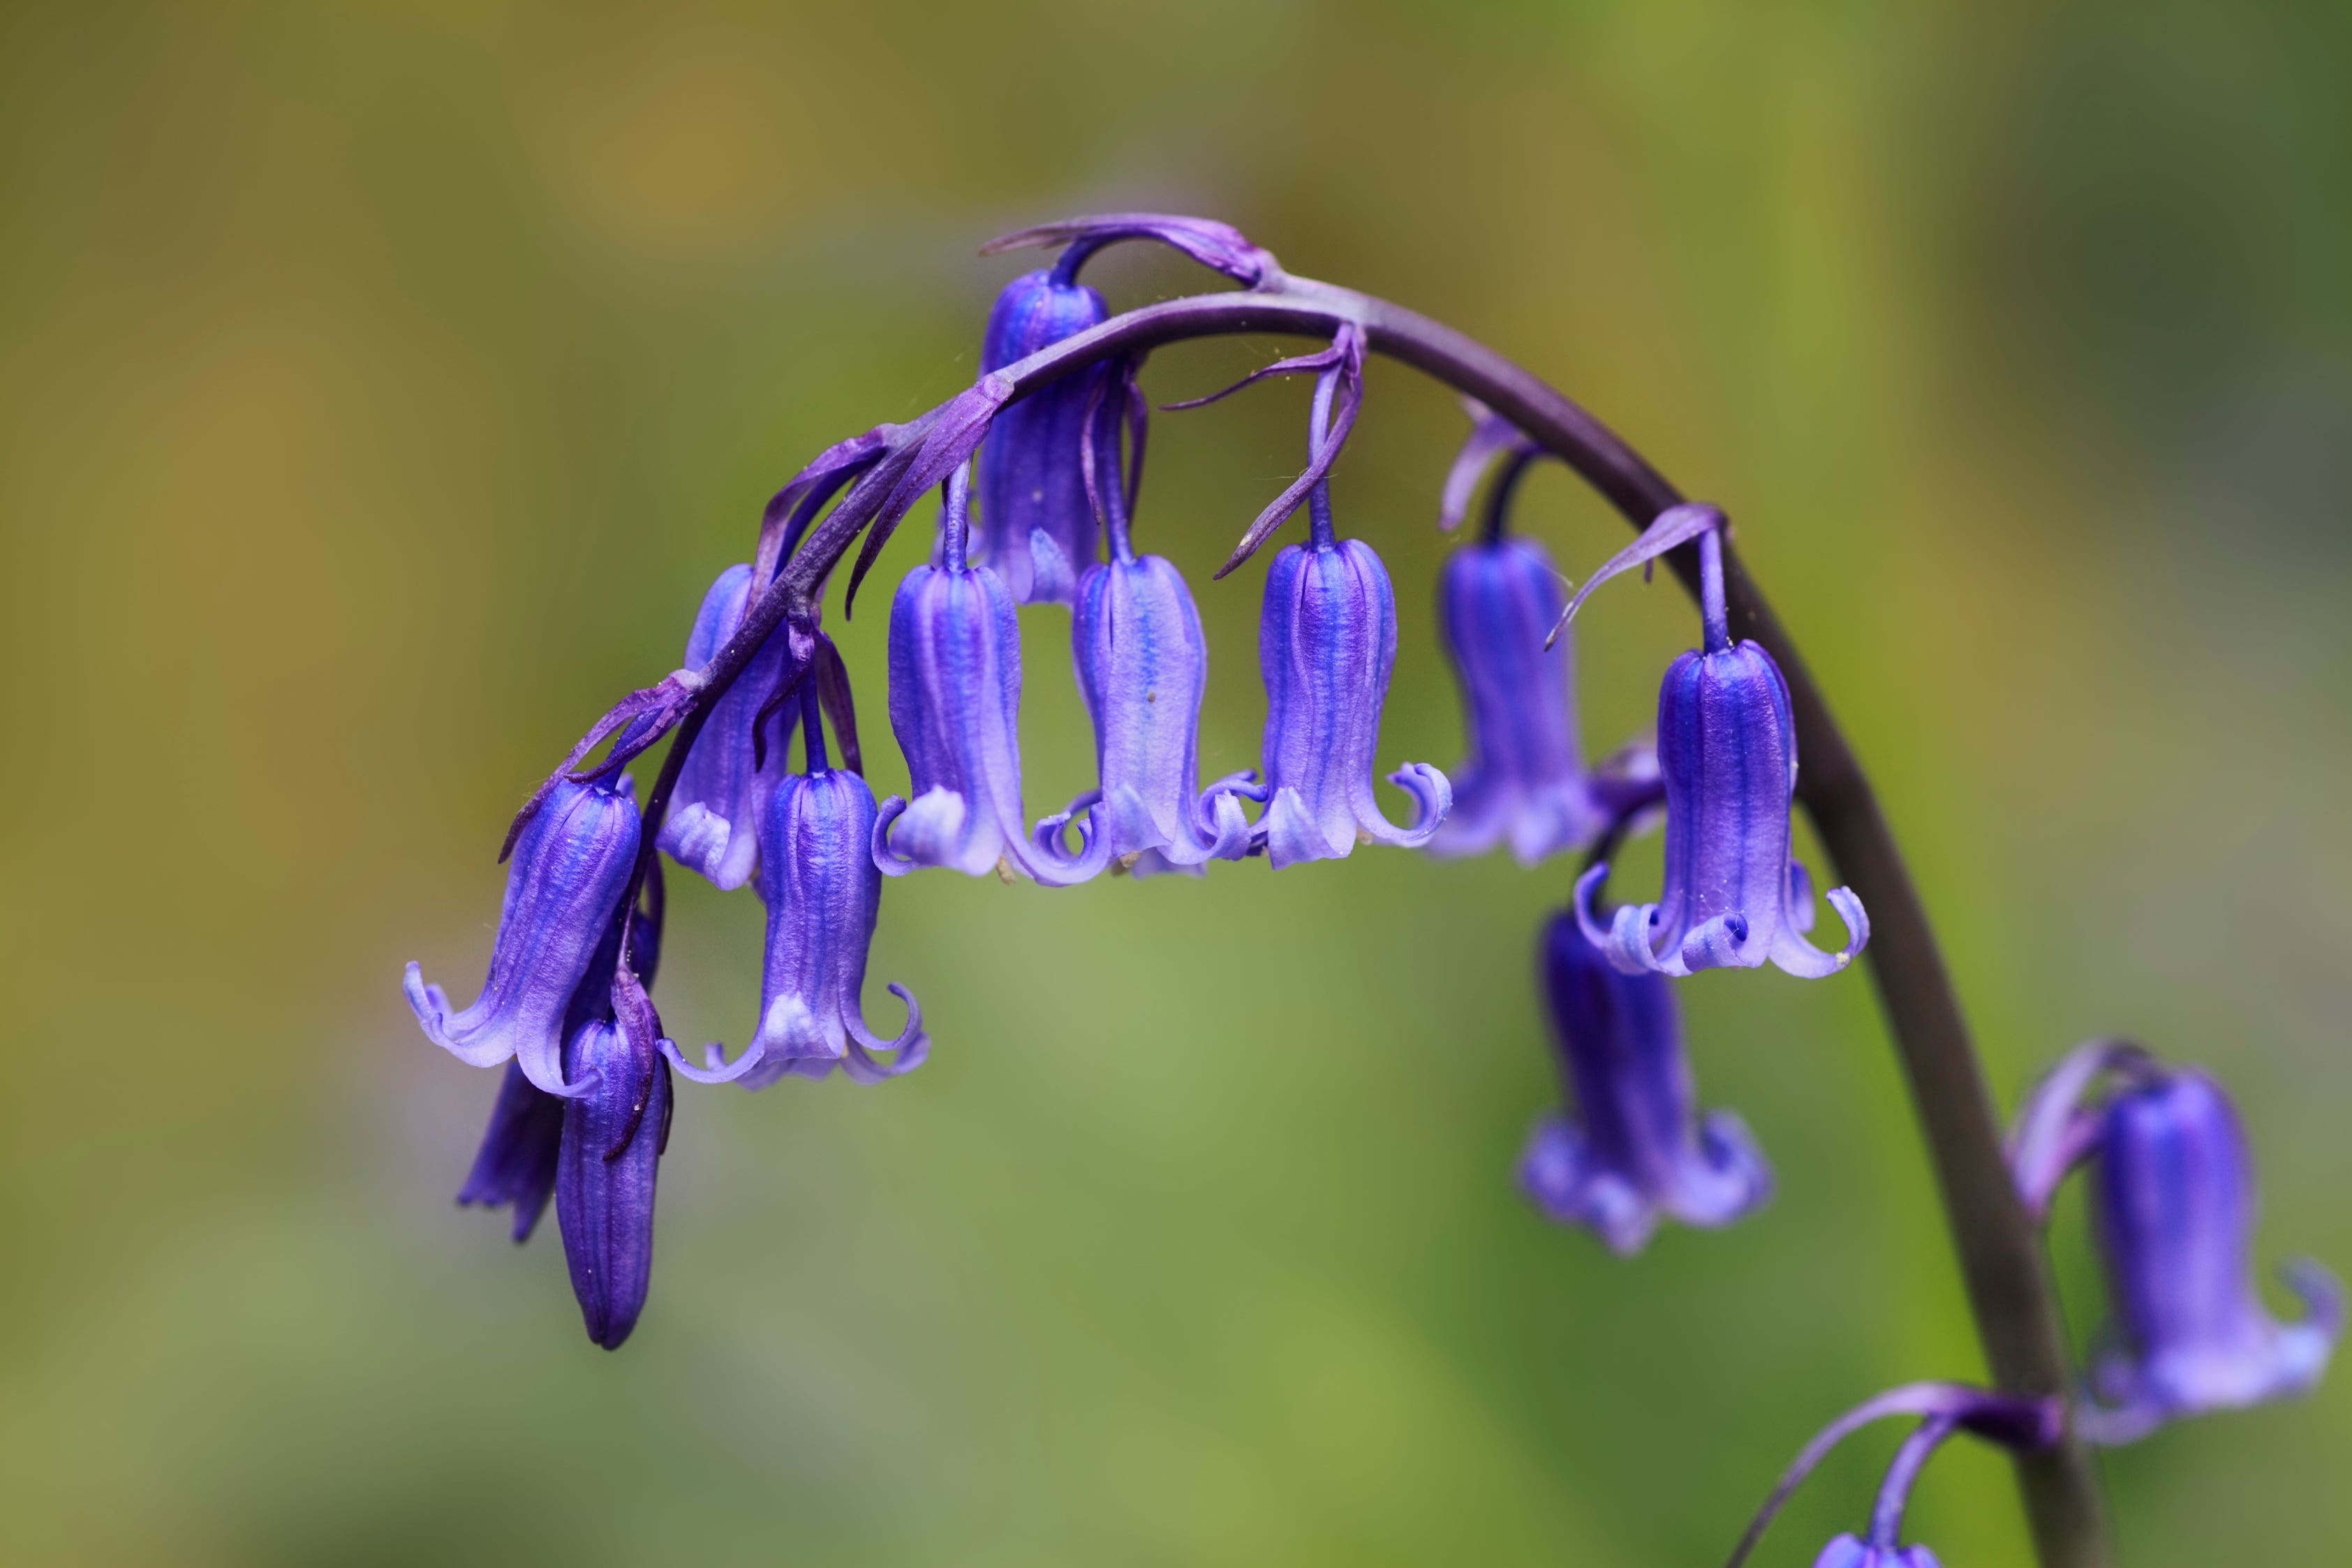 How to Grow and Care for Spanish Bluebells